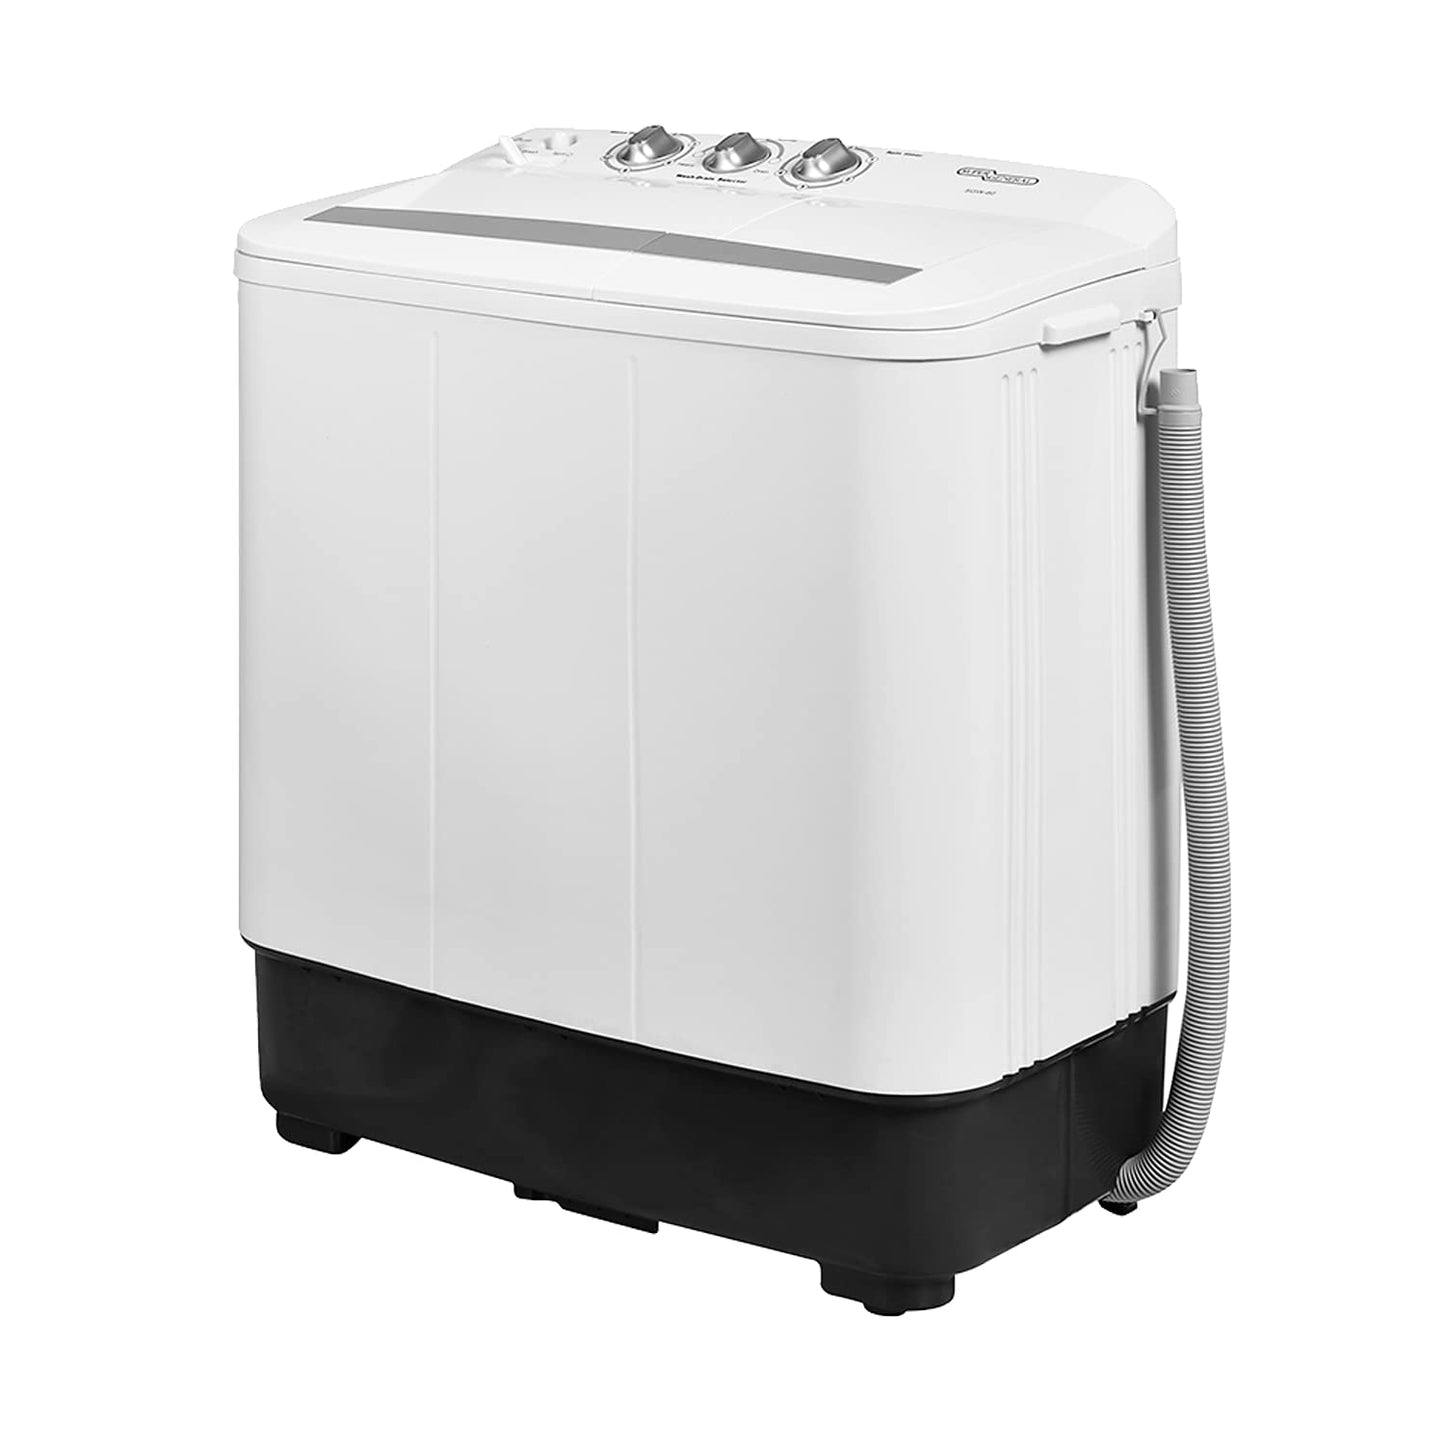 Super General 6 kg Twin-tub Semi-Automatic Washing Machine, White, efficient Top-Load Washer with Lint Filter, Spin-Dry, SGW-60, 73.5 x 51.2 x 100.5 cm, 1 Year Warranty